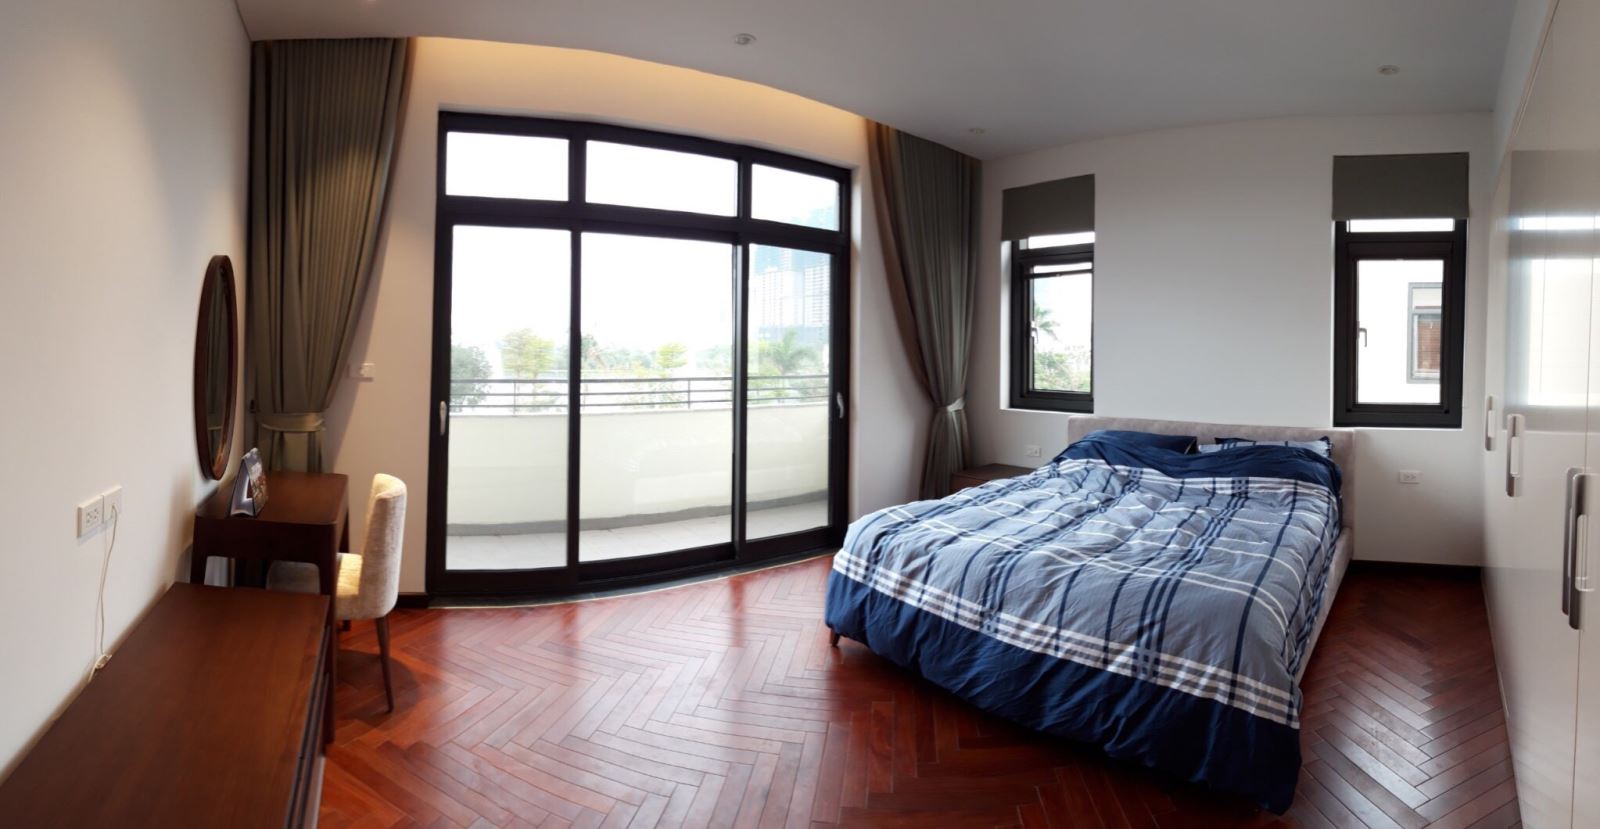 The Master bedroom with balcony